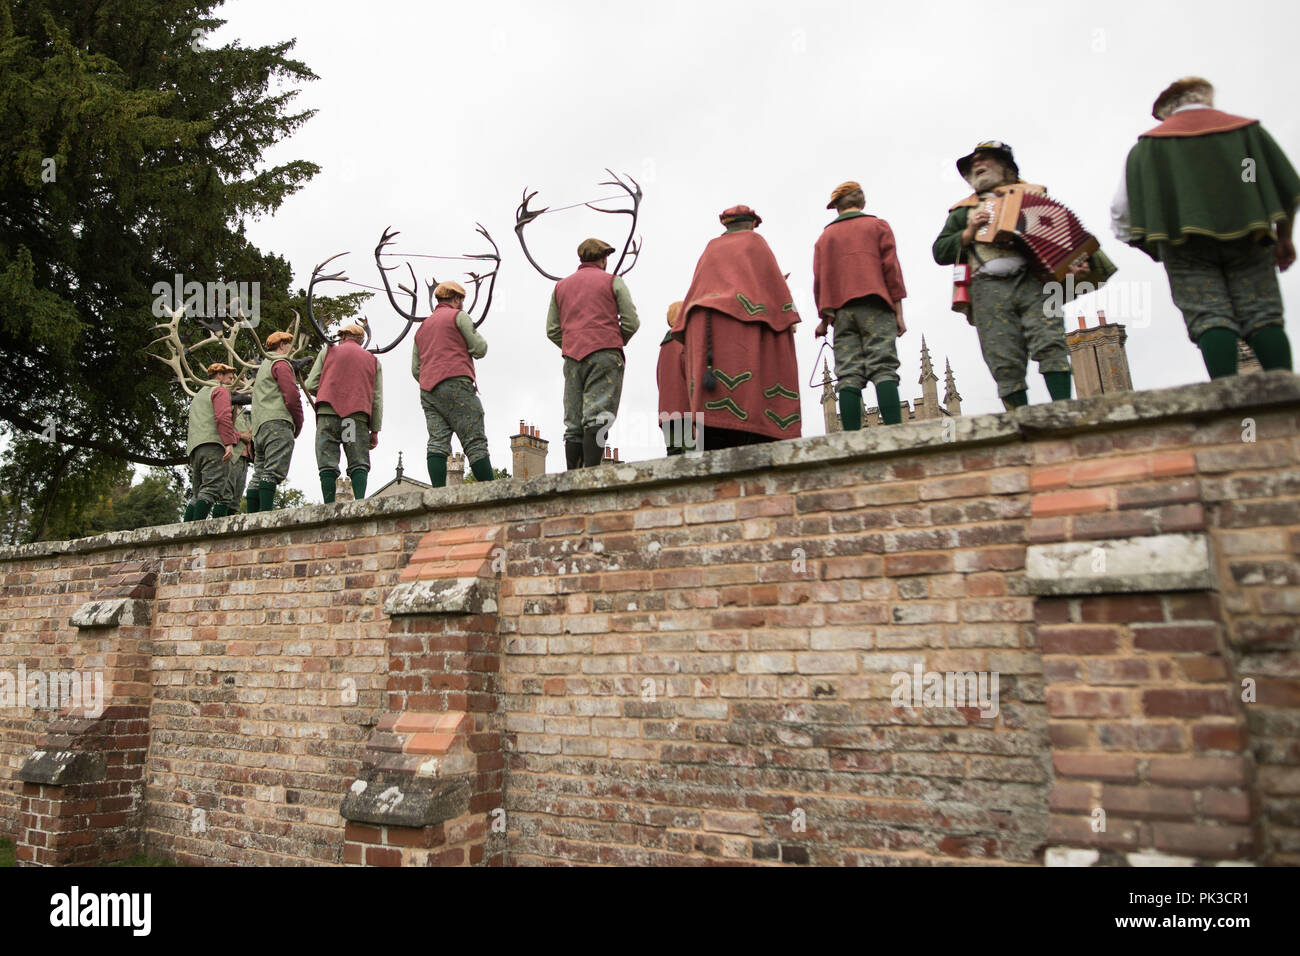 Dancers perform the Abbots Bromley Horn Dance, an English folk dance whose origins date back to the middle ages, in the Village of Abbots Bromley, Staffordshire. Stock Photo